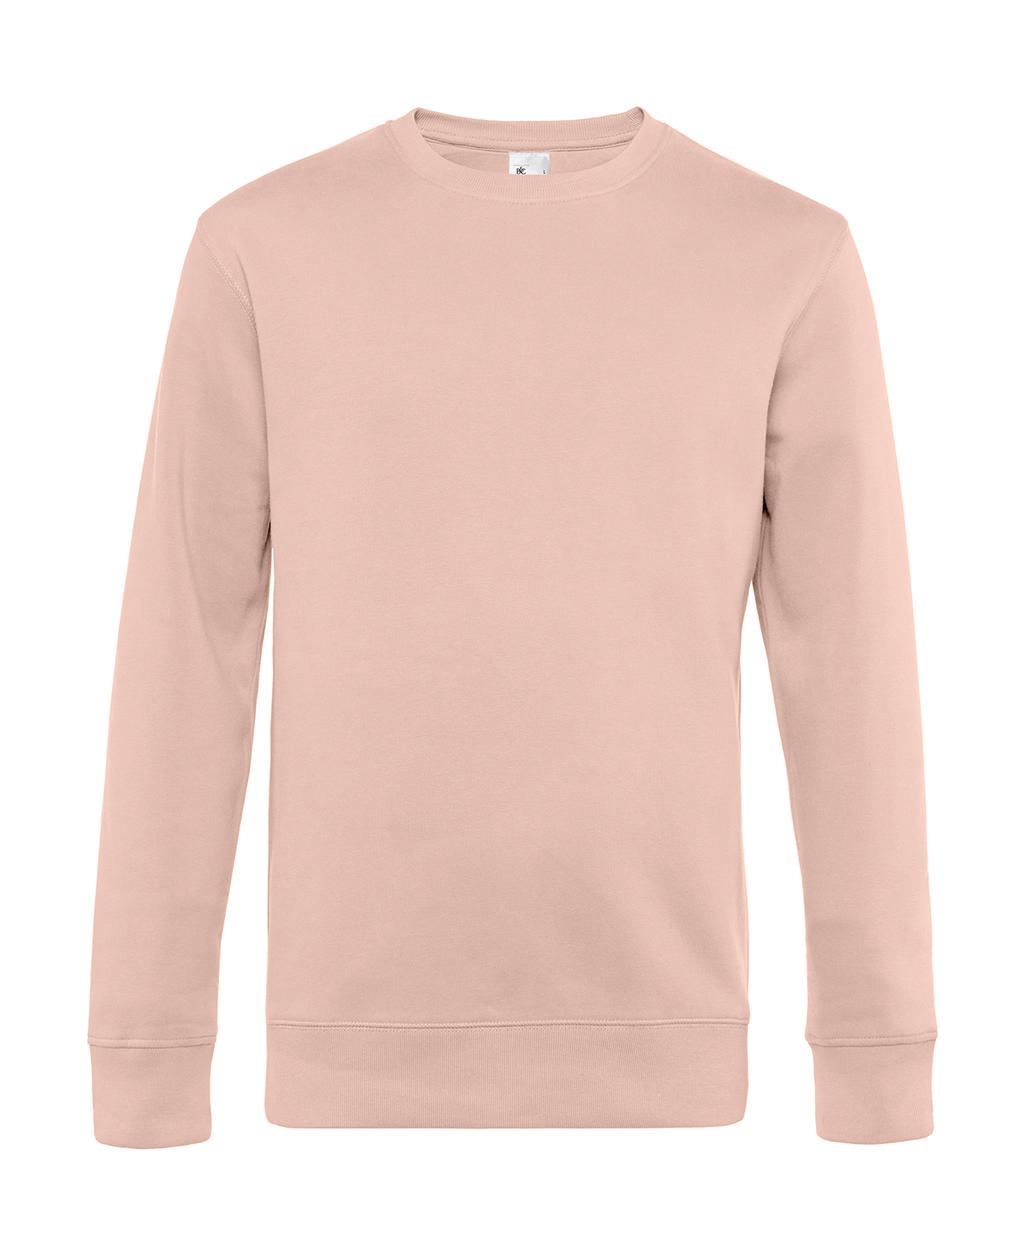  KING Crew Neck_? in Farbe Soft Rose